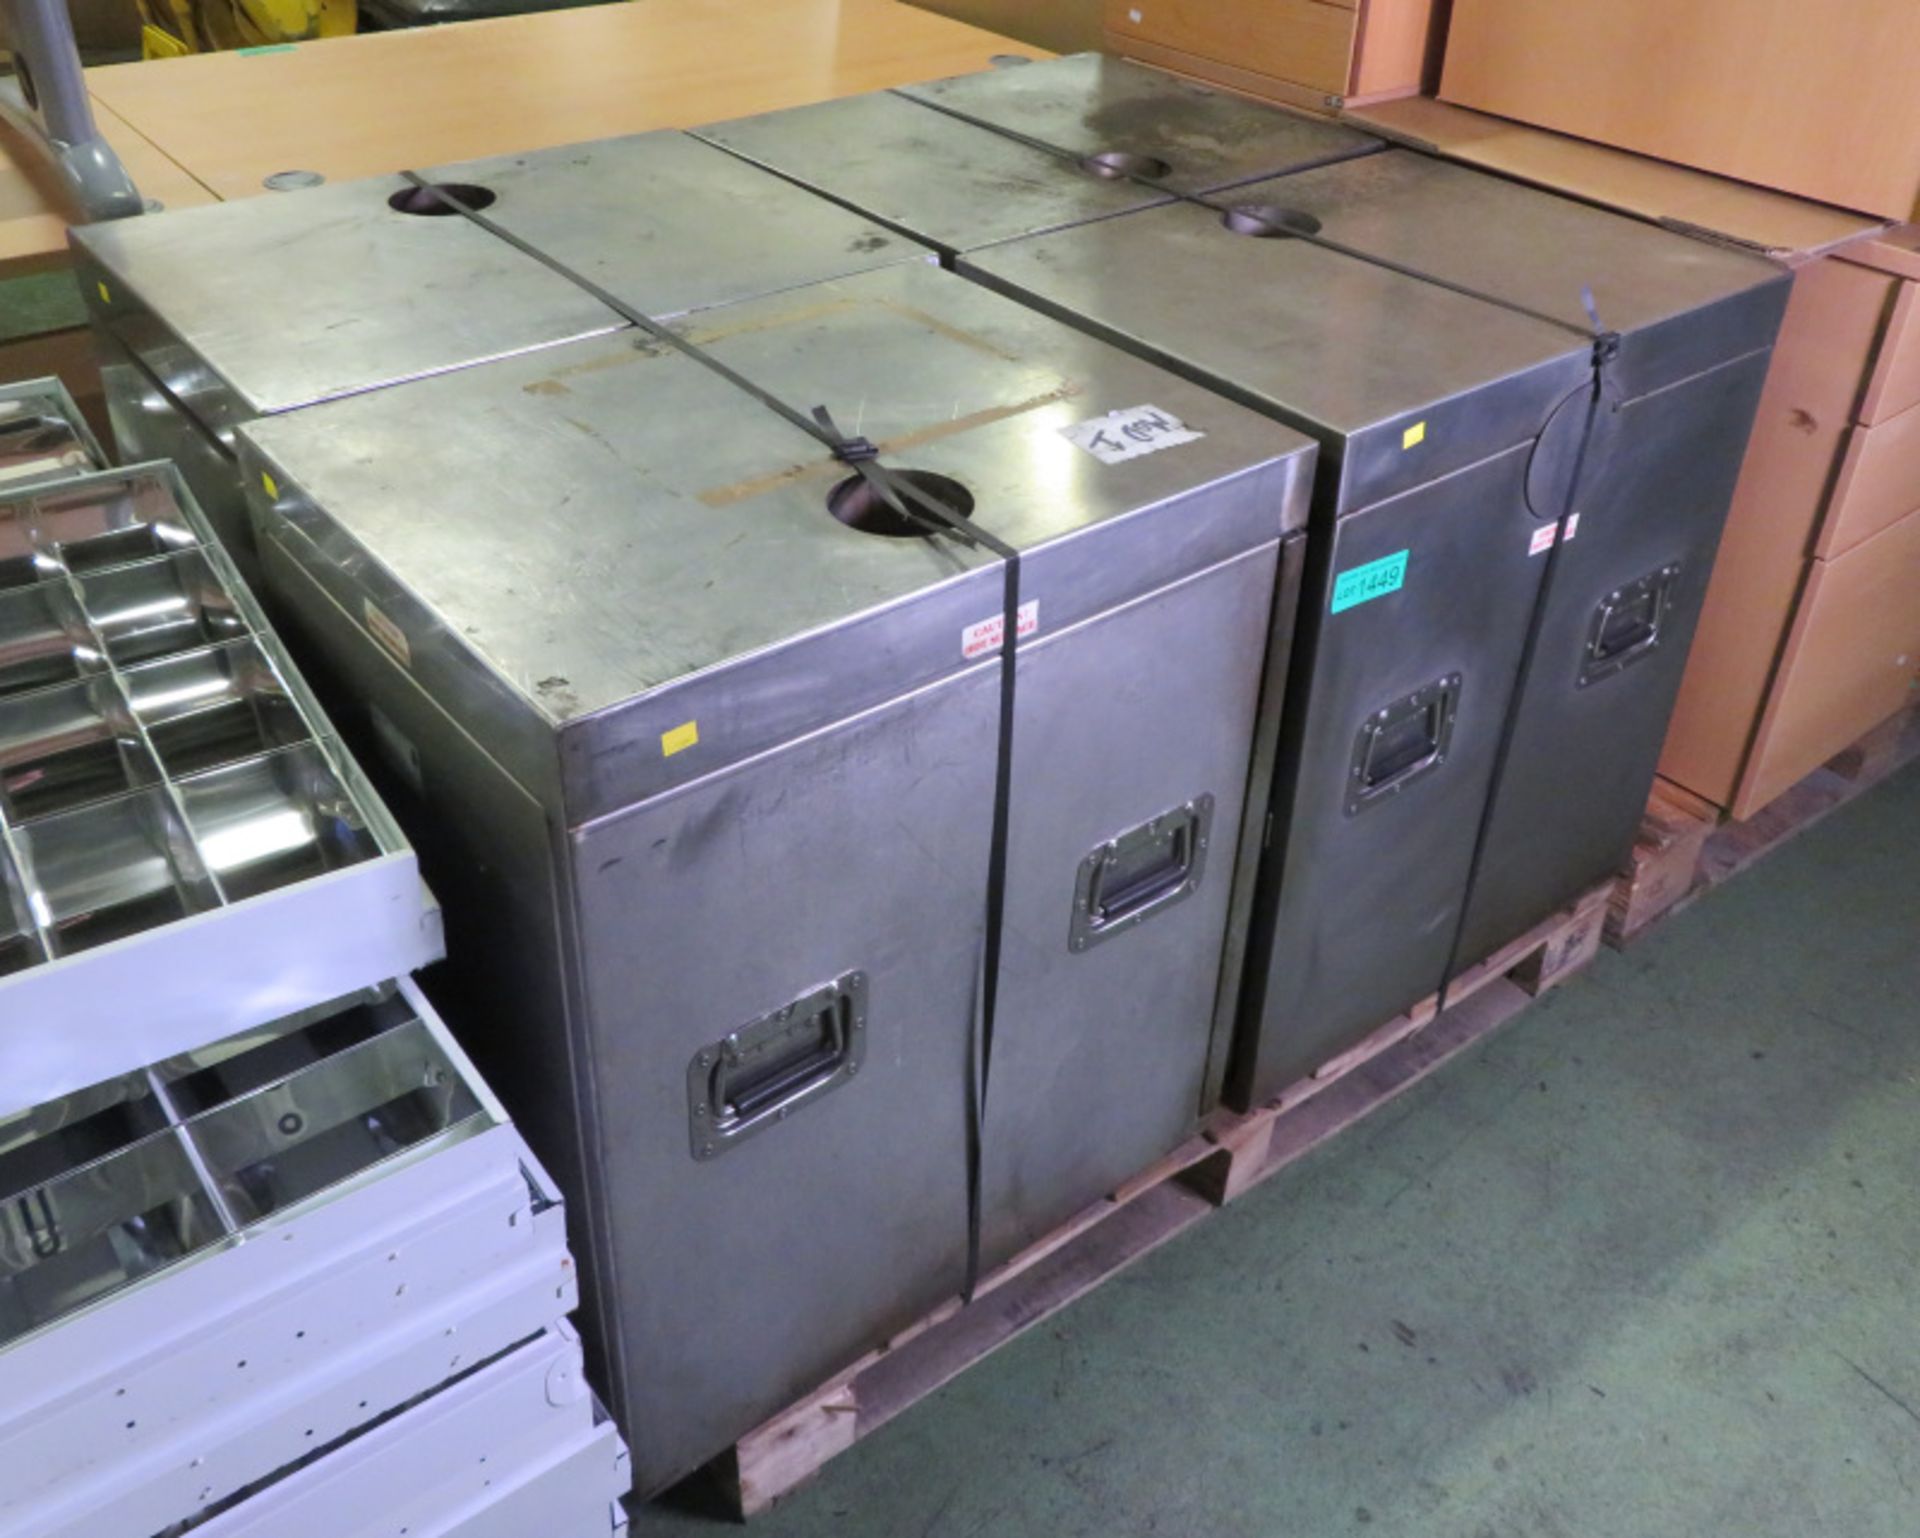 4x Baking and Roasting Ovens - W 650mm x D 500mm x H 740mm - Image 2 of 2